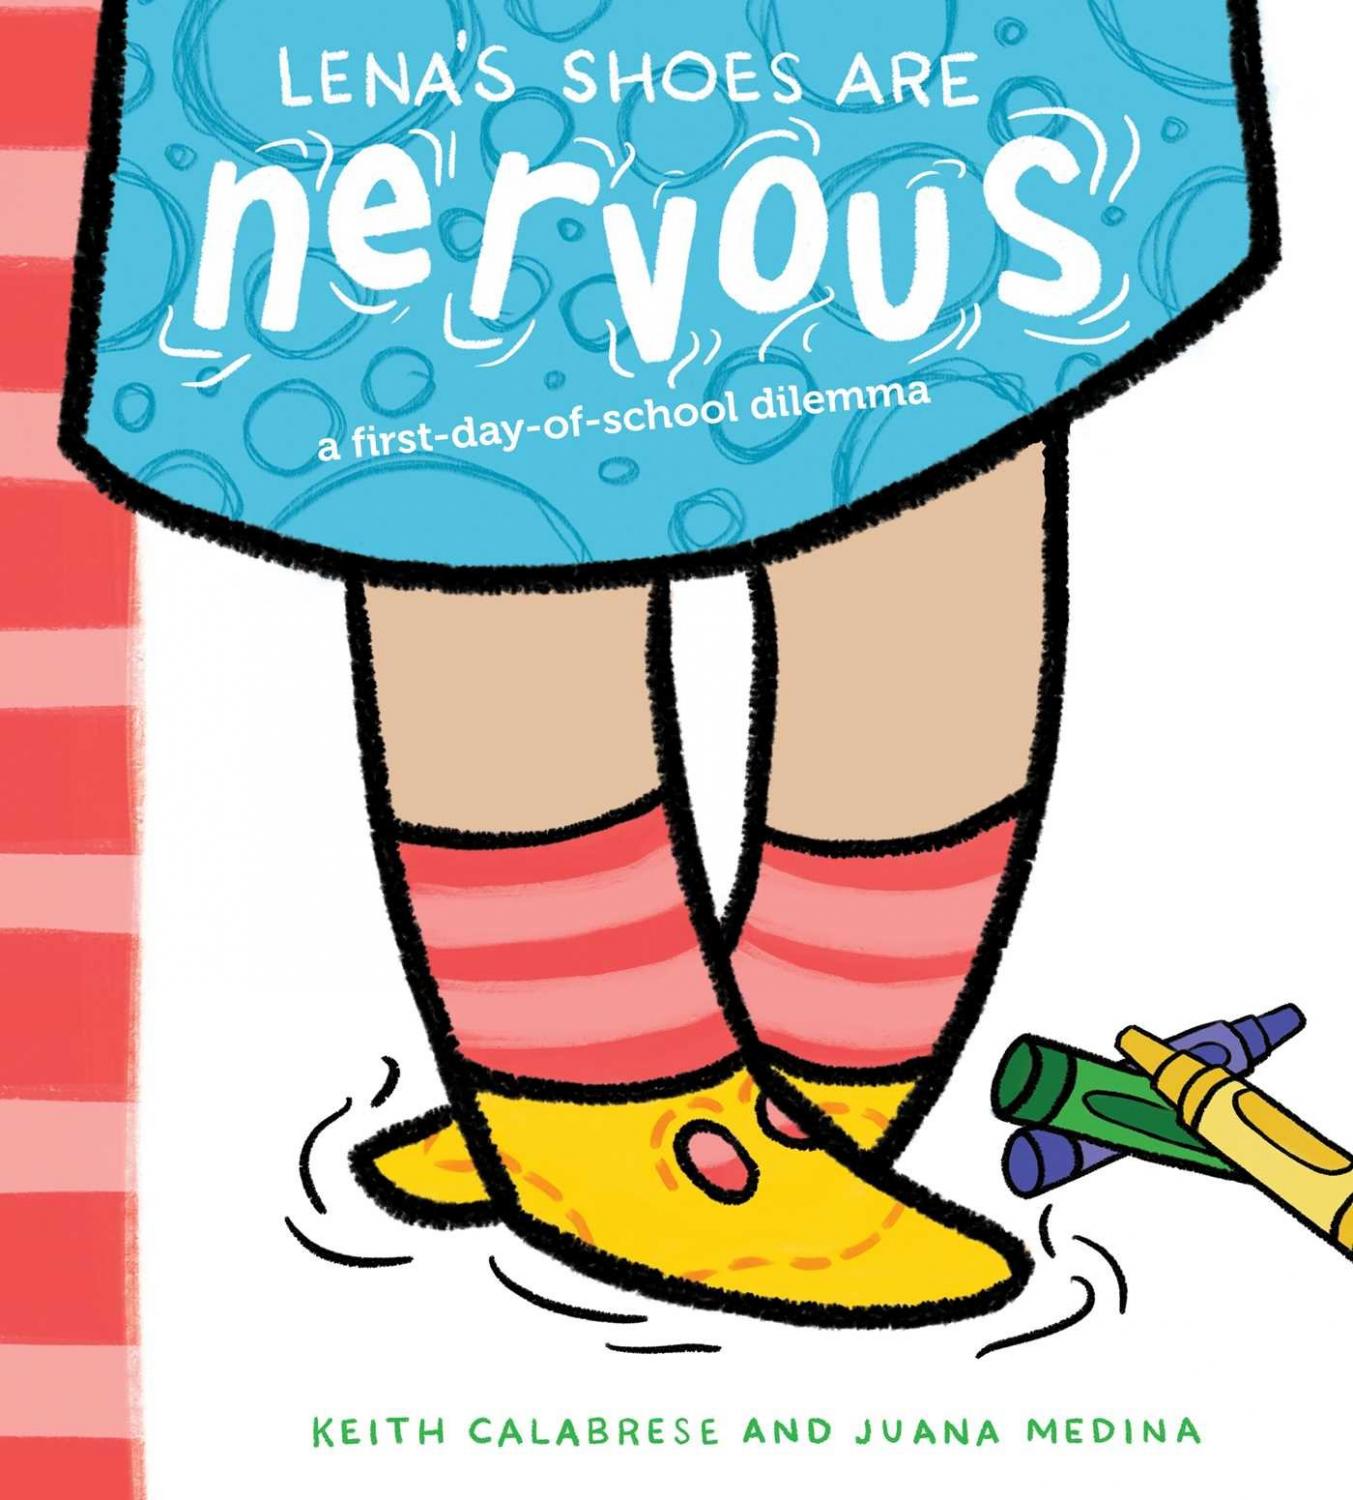 Illustration of a close up of a small girl wearing yellow shoes